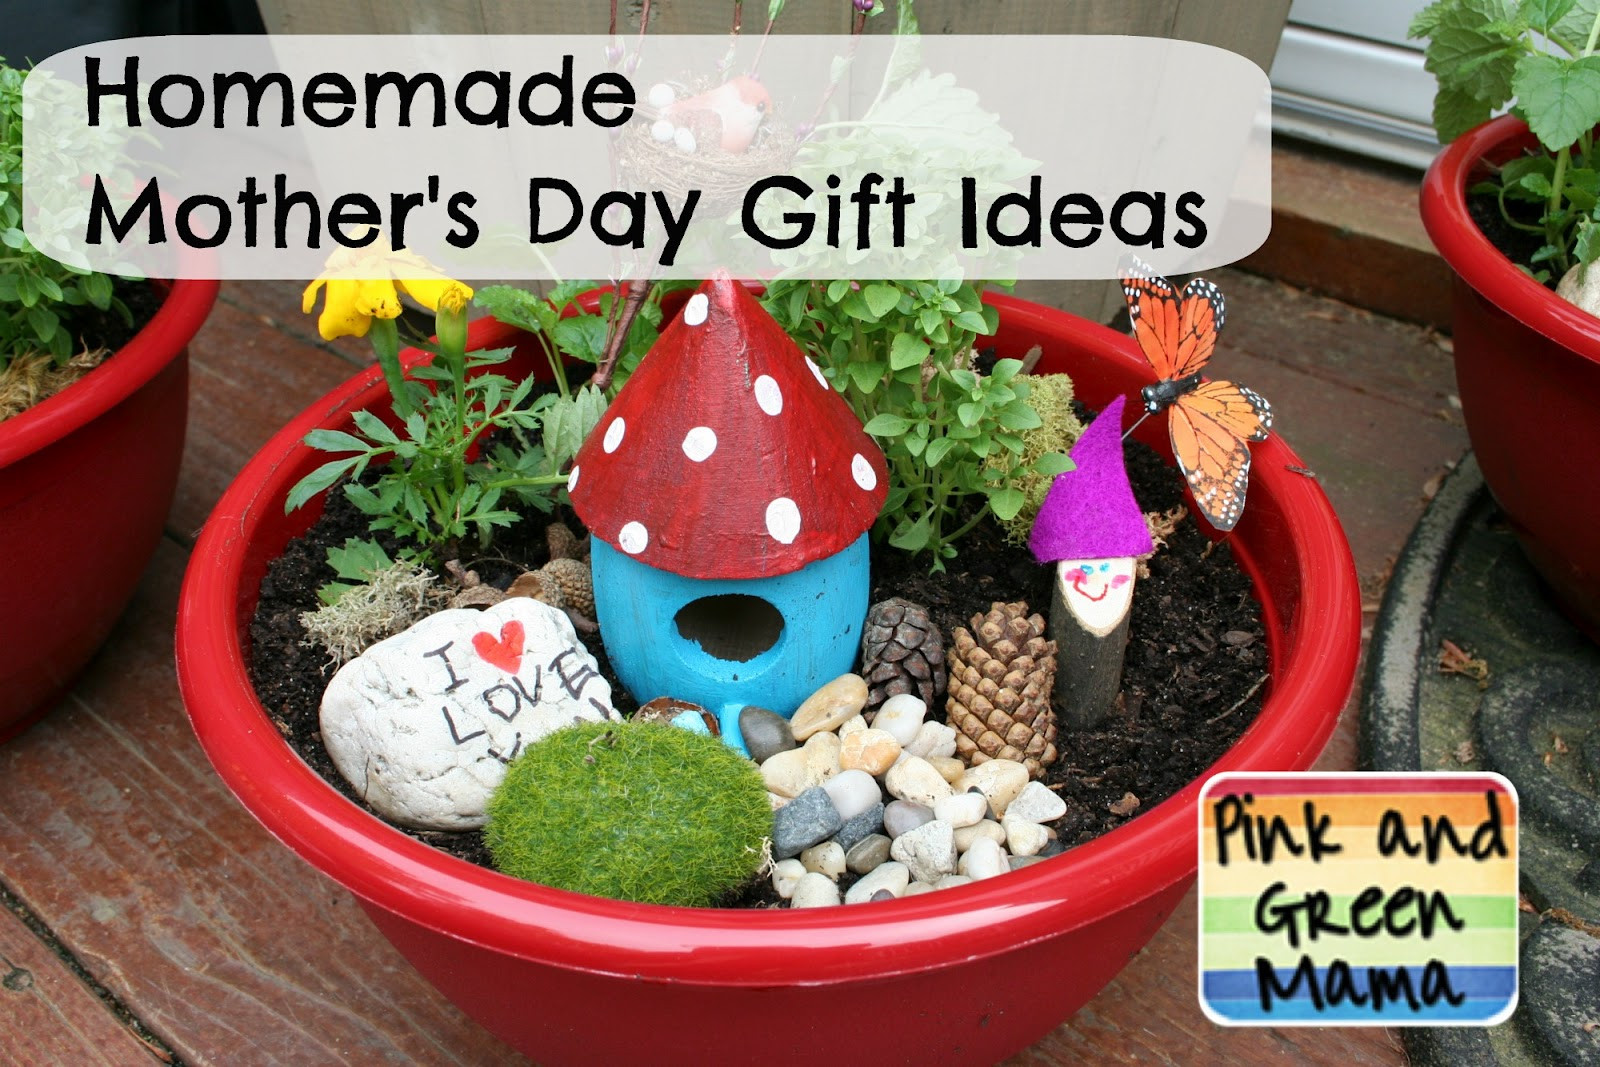 Homemade Birthday Gifts For Mom From Kids
 Pink and Green Mama Homemade Mother s Day Gift Ideas